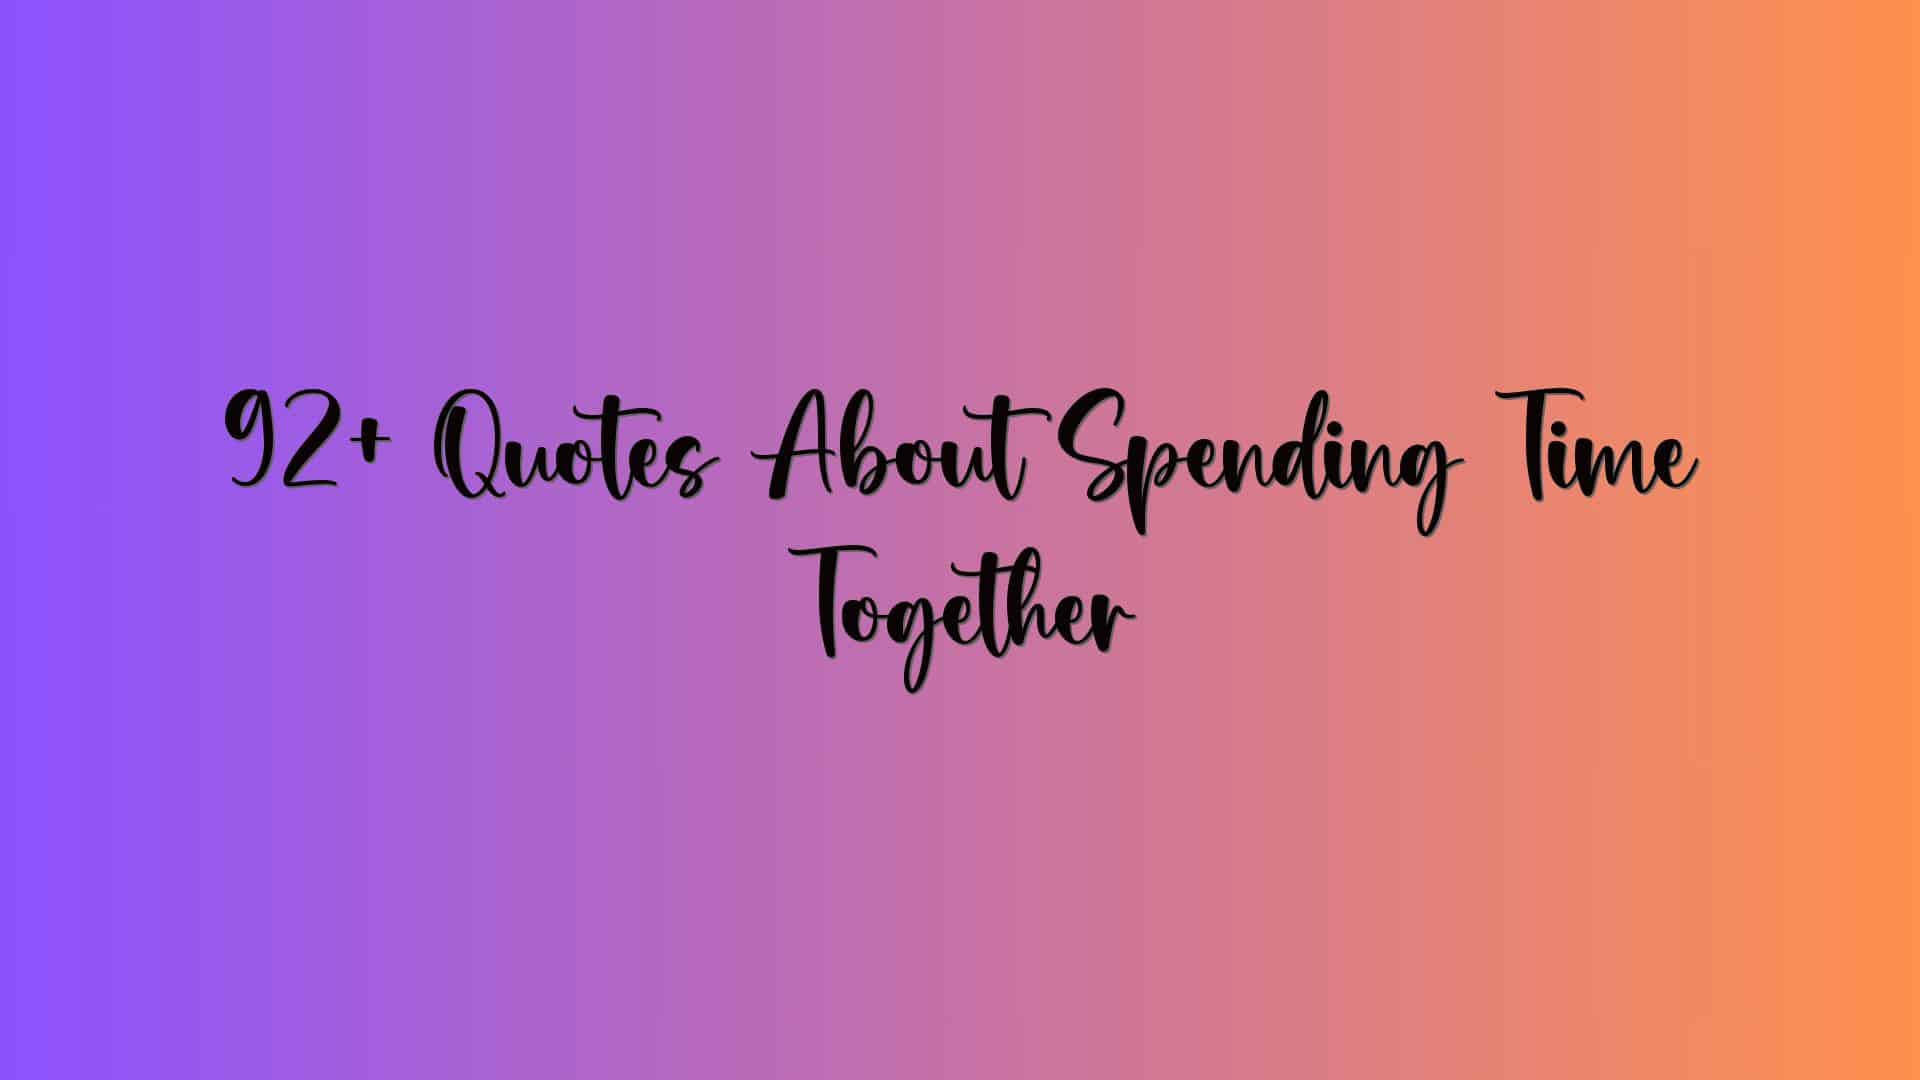 92+ Quotes About Spending Time Together